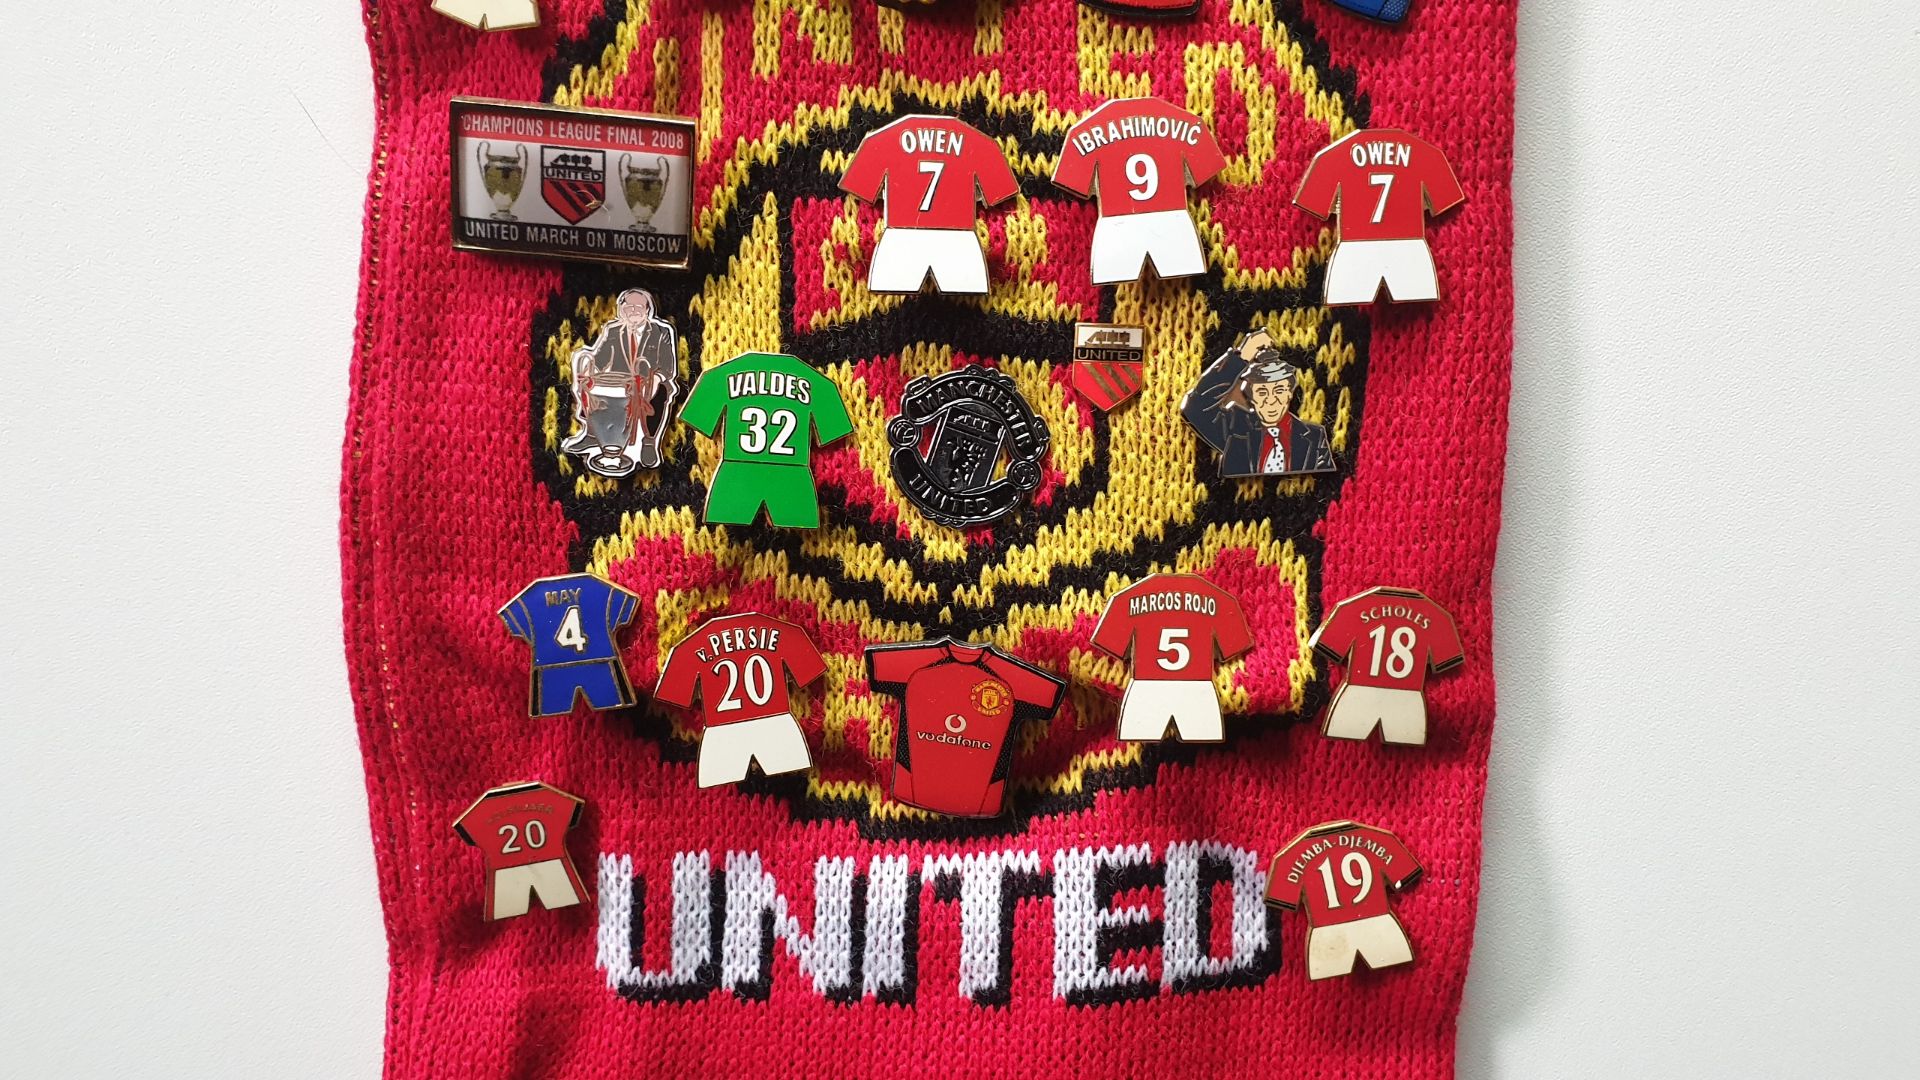 MANCHESTER UNITED SCARF CONTAINING APPROX 200 X PIN BADGES IE CHAMPIONS LEAGUE FINAL 2008, CARLING - Image 8 of 8